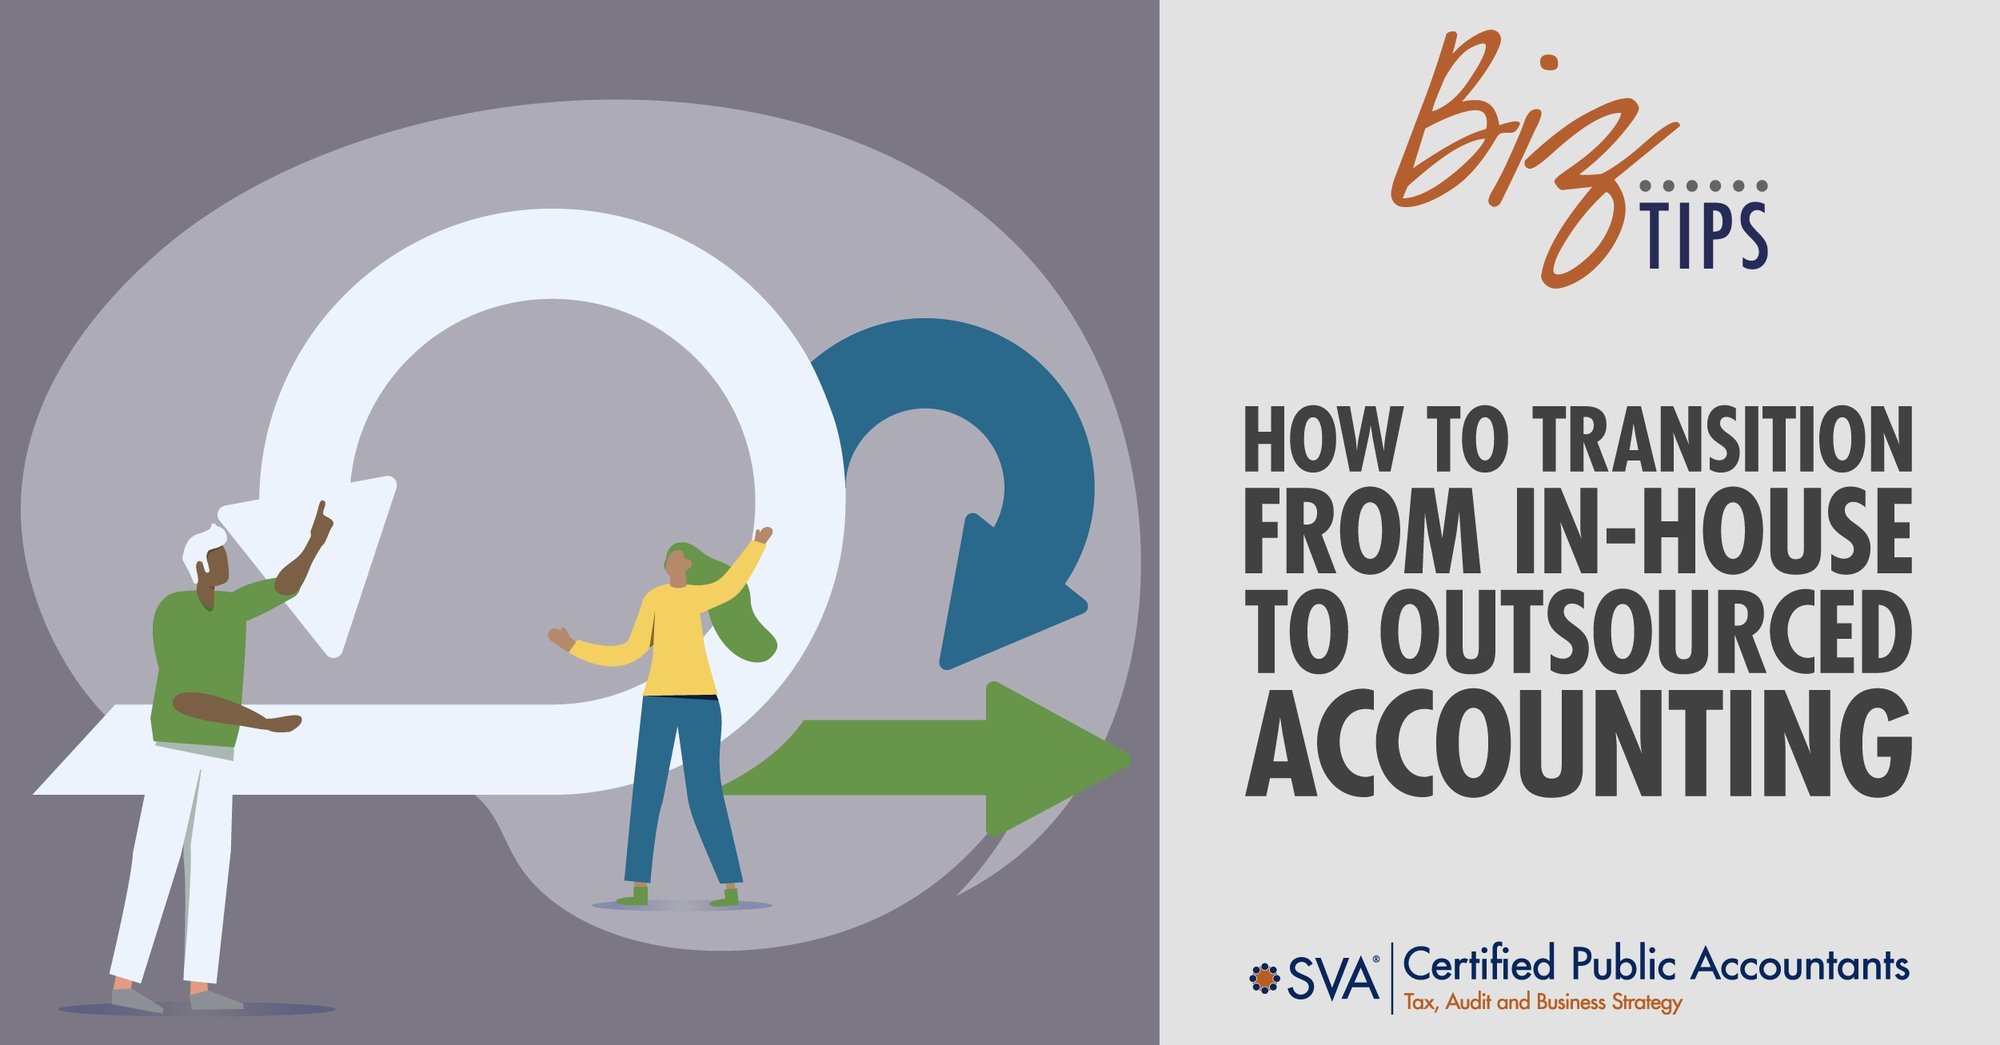 sva-certified-public-accountants-biz-tips-how-to-transition-from-in-house-to-outsourced-accounting-1